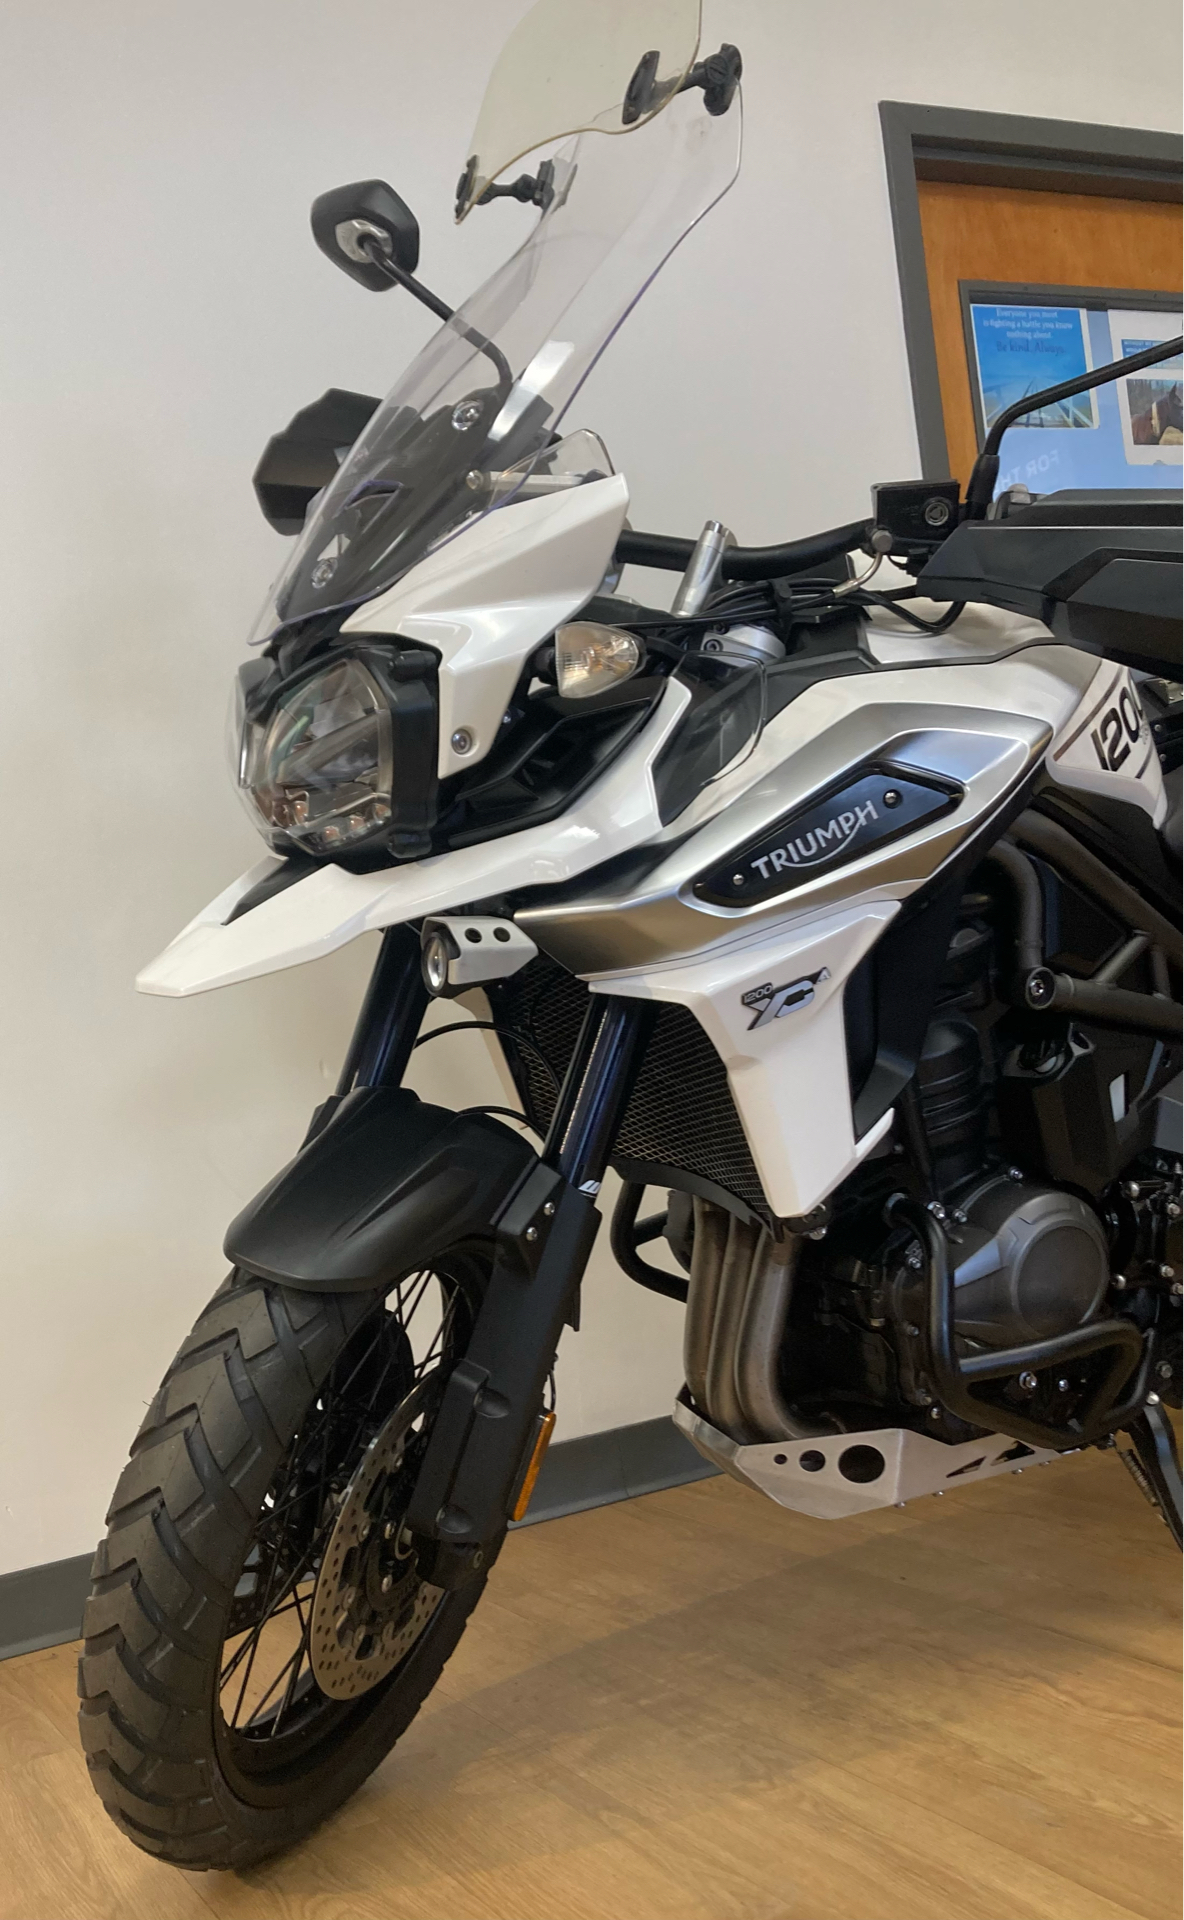 2018 Triumph Tiger 1200 XCa in Mahwah, New Jersey - Photo 3